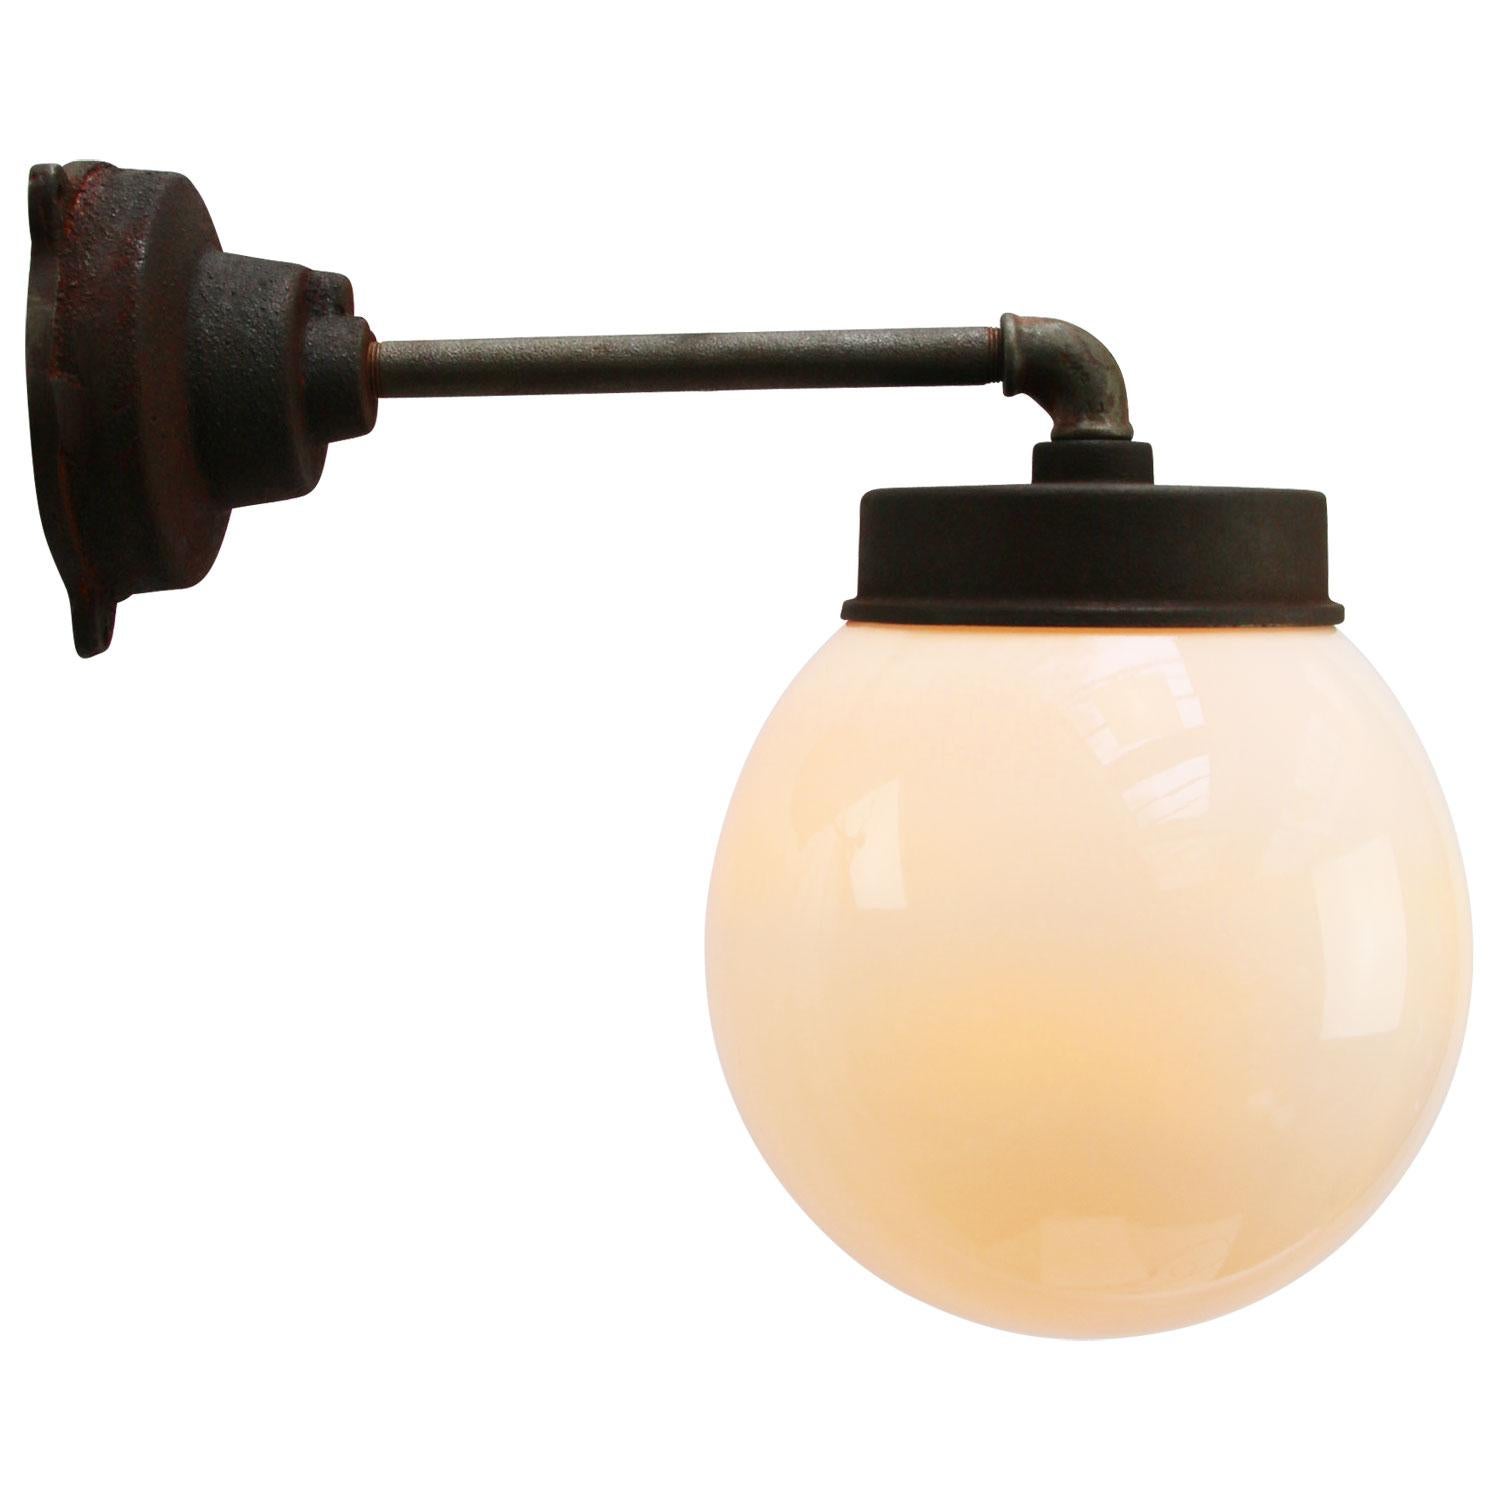 Opaline glass Industrial wall light.

Diameter cast iron wall piece: 12 cm. Three holes to secure.

Weight: 6.30 kg / 13.9 lb

All lamps have been made suitable by international standards for incandescent light bulbs, energy-efficient and LED